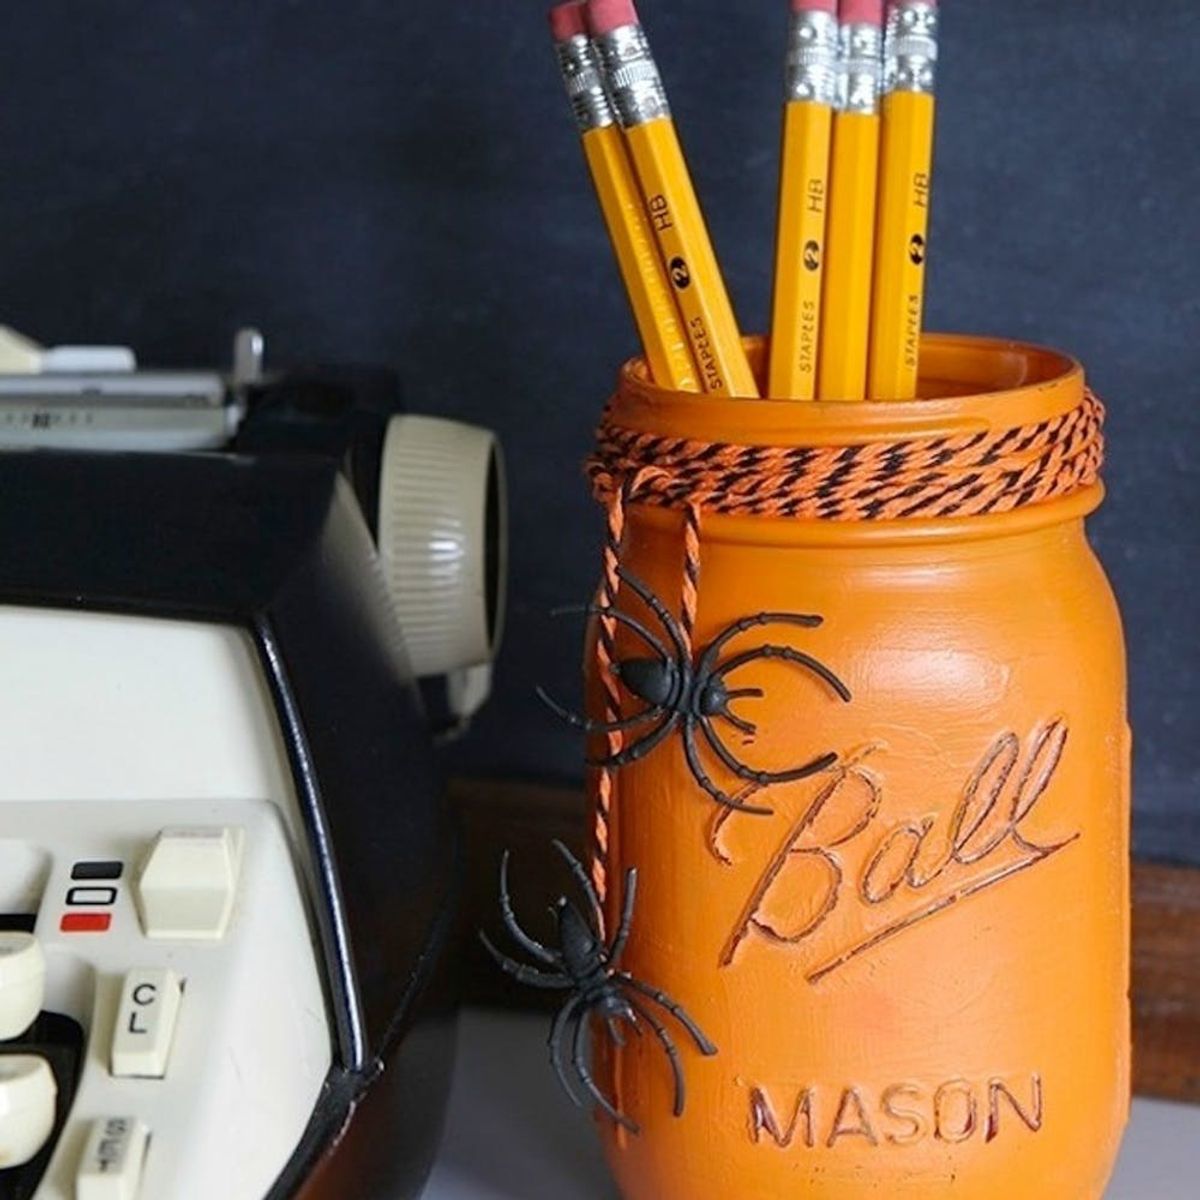 17 Halloween Decor Ideas for a Spooky Office or Cubicle